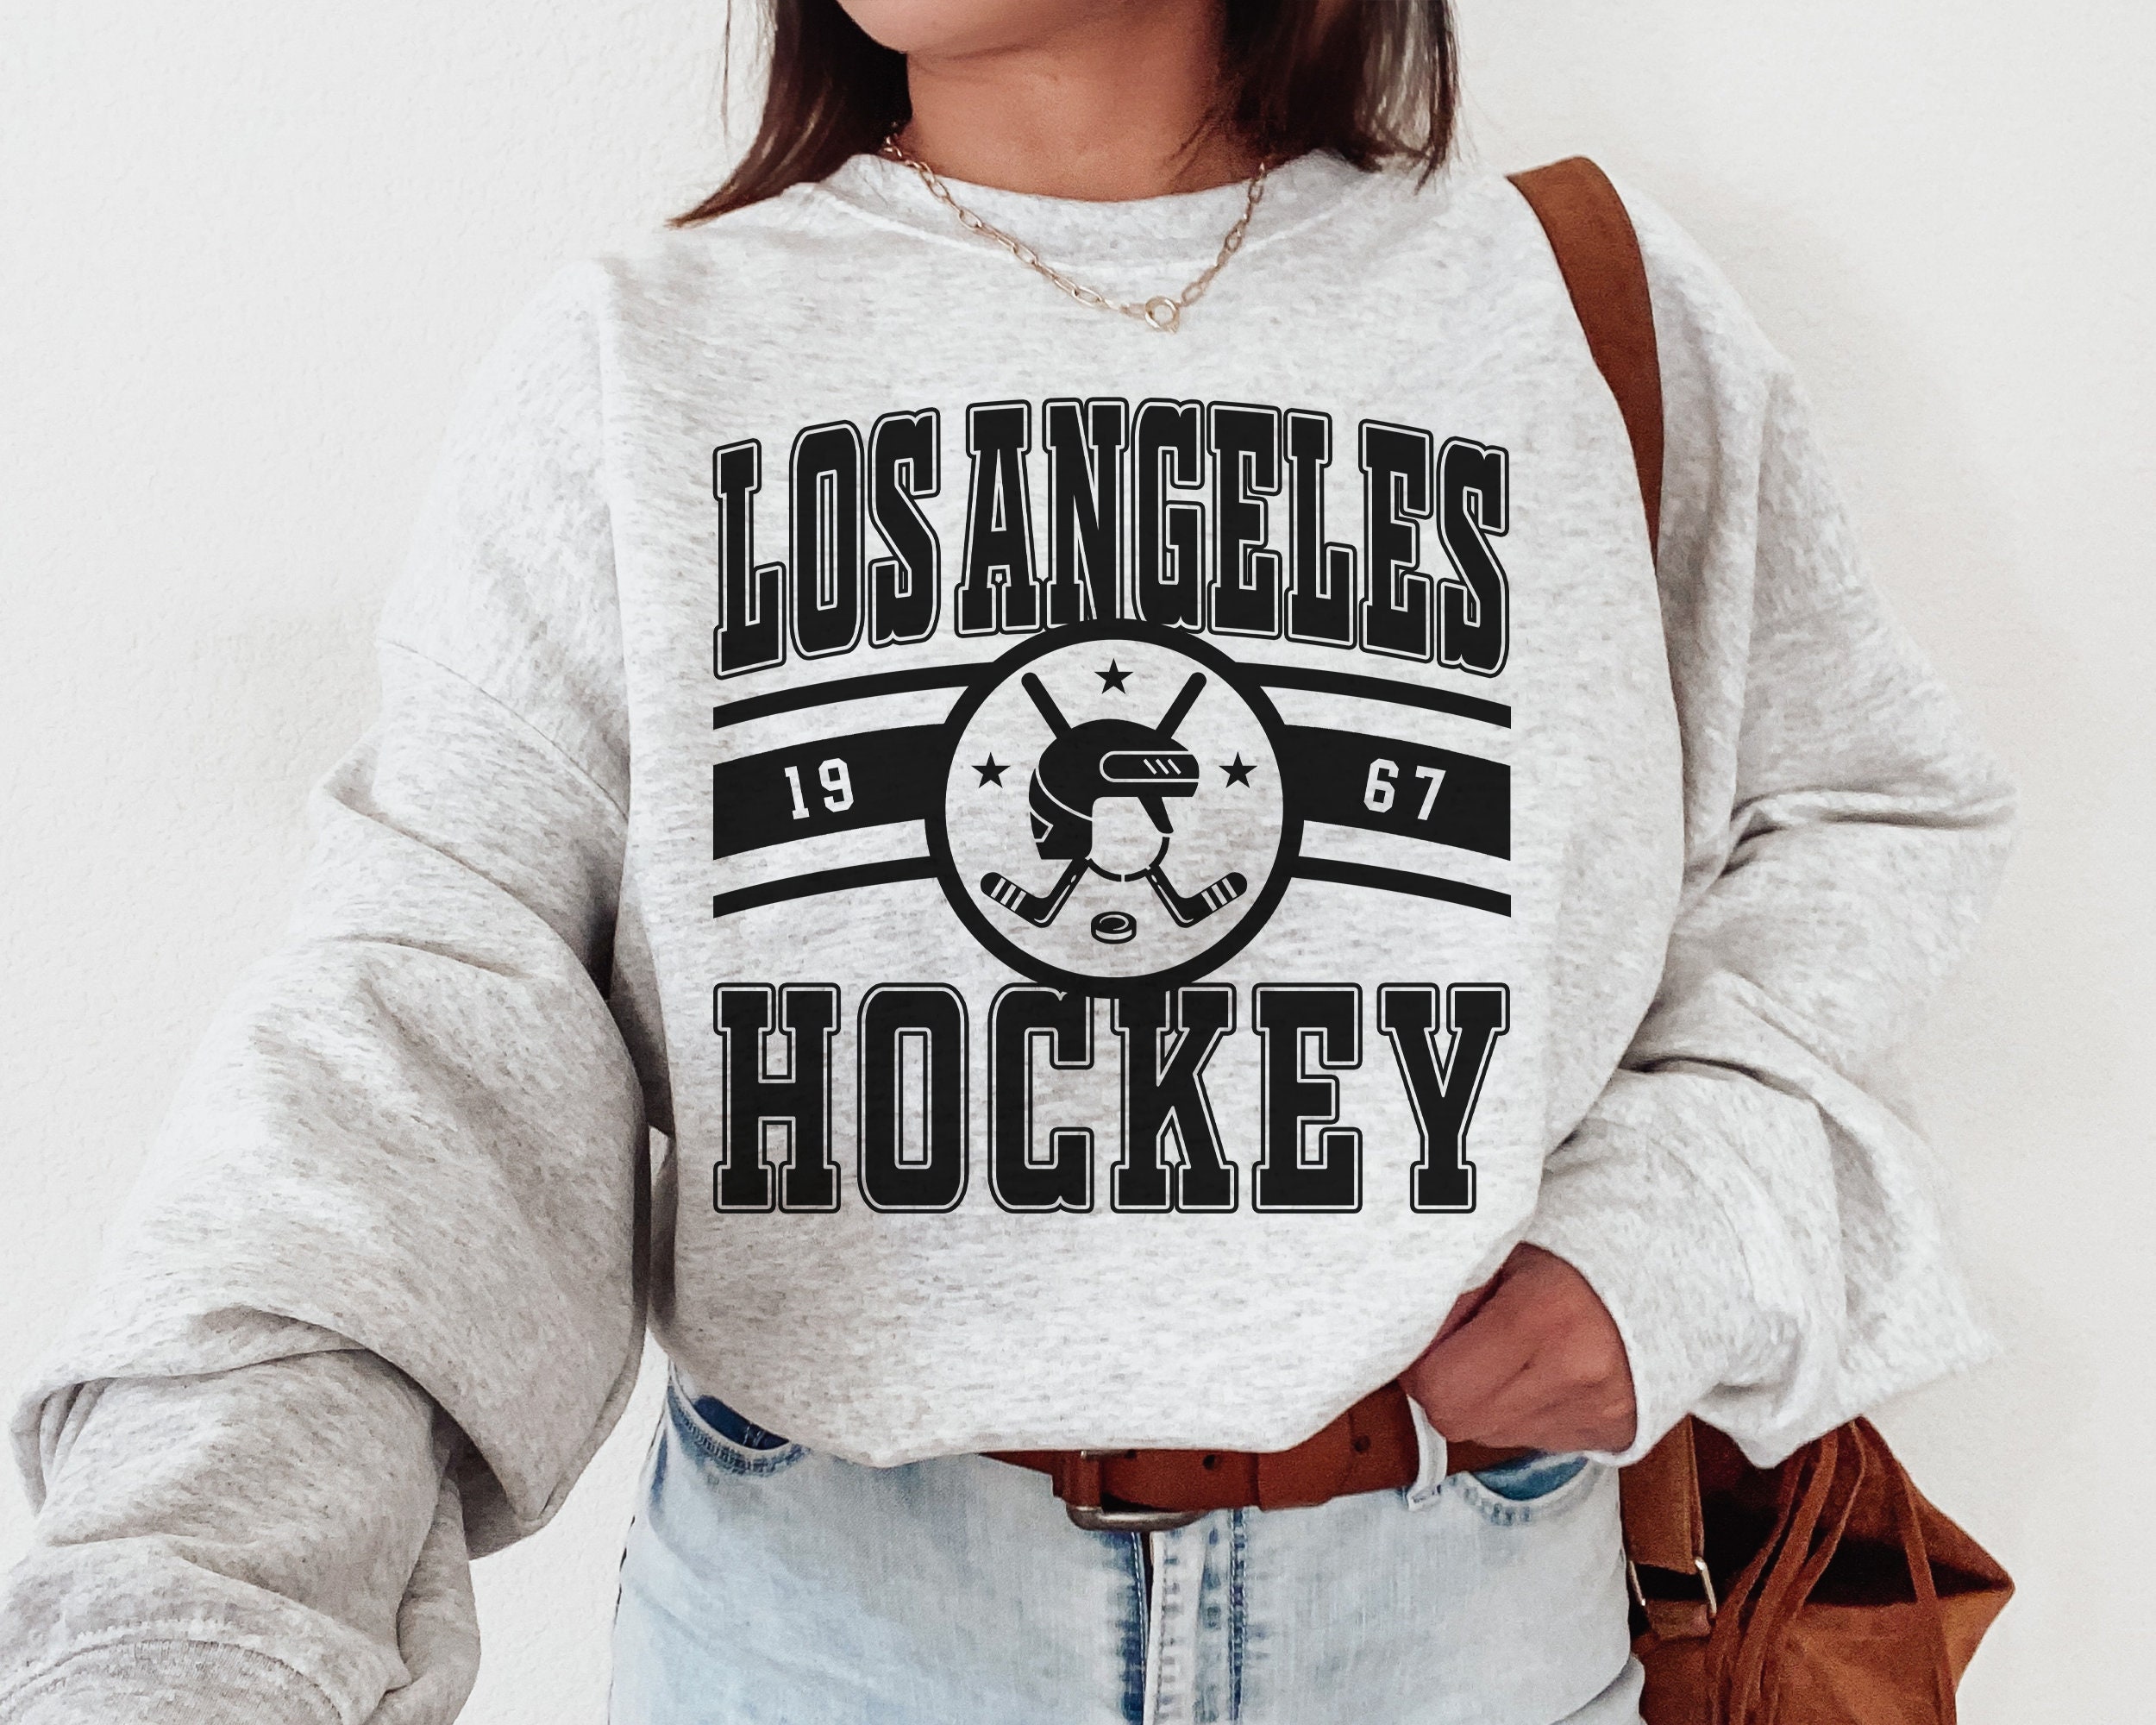 Tags Weekly Womens La Kings Graphic T-Shirt, Beige